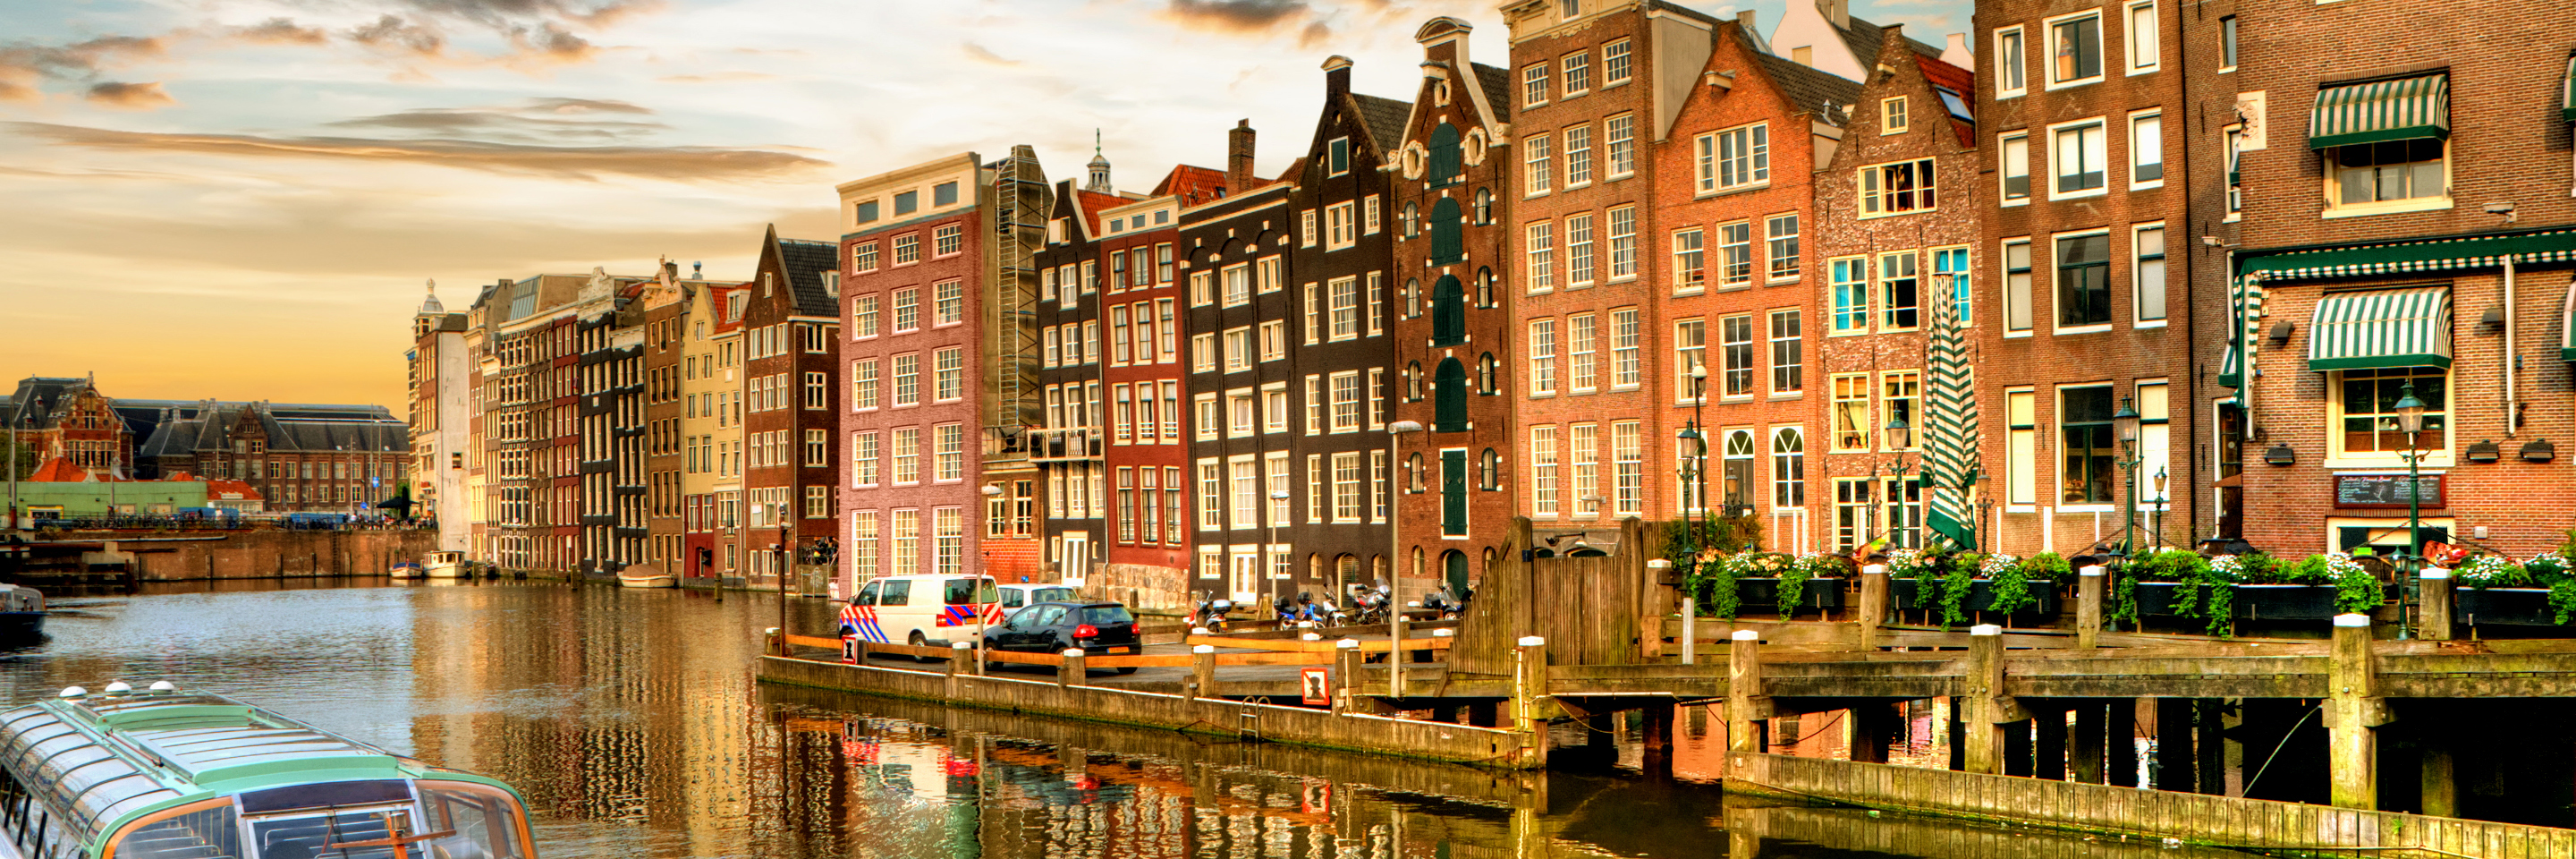 Grand Tulip Cruise of Holland & Belgium for Garden and Nature Lovers with 1 night in Amsterdam